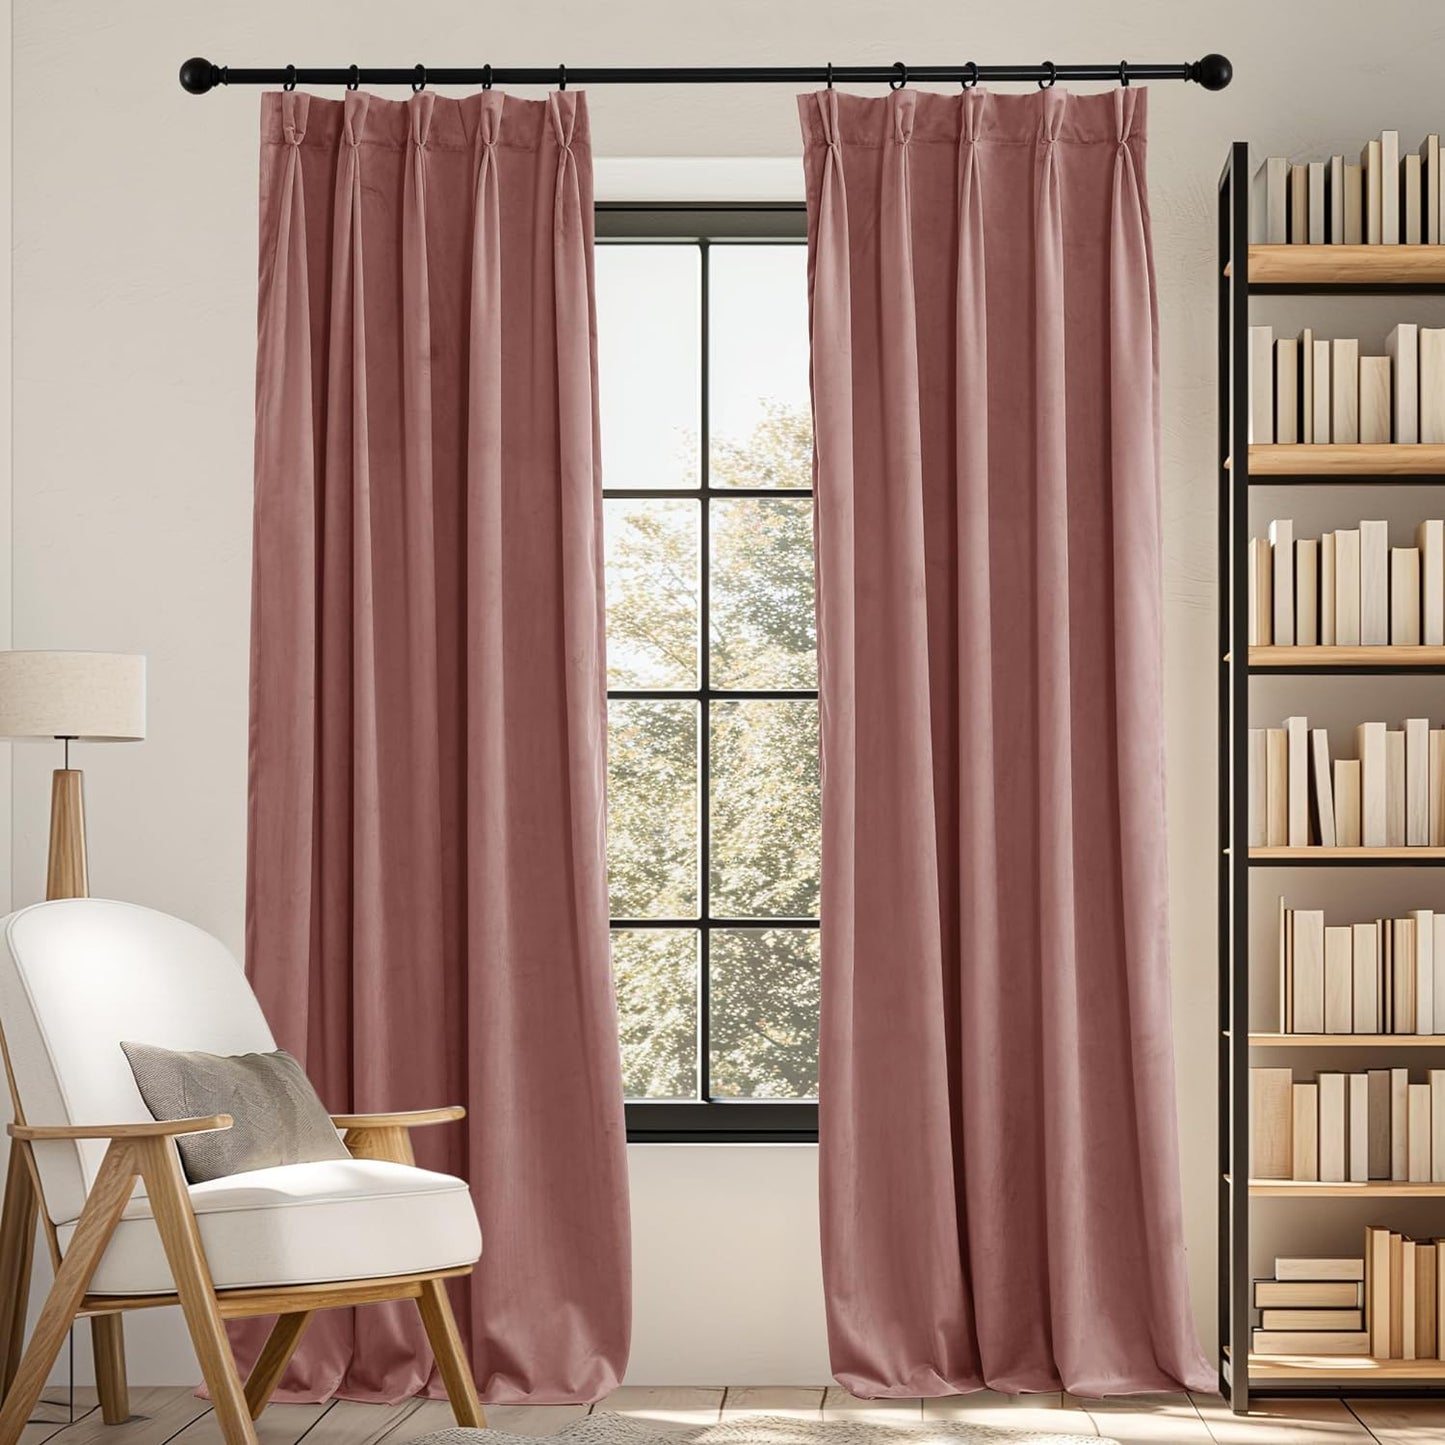 RYB HOME Pinch Pleated Velvet Curtains, Room Darkening Thermal Insulated Privacy Protect Pleated Drapes for Girls Bedroom Princess Room, Wild Rose, W34 X L90 Inches, 2 Panels  RYB HOME   